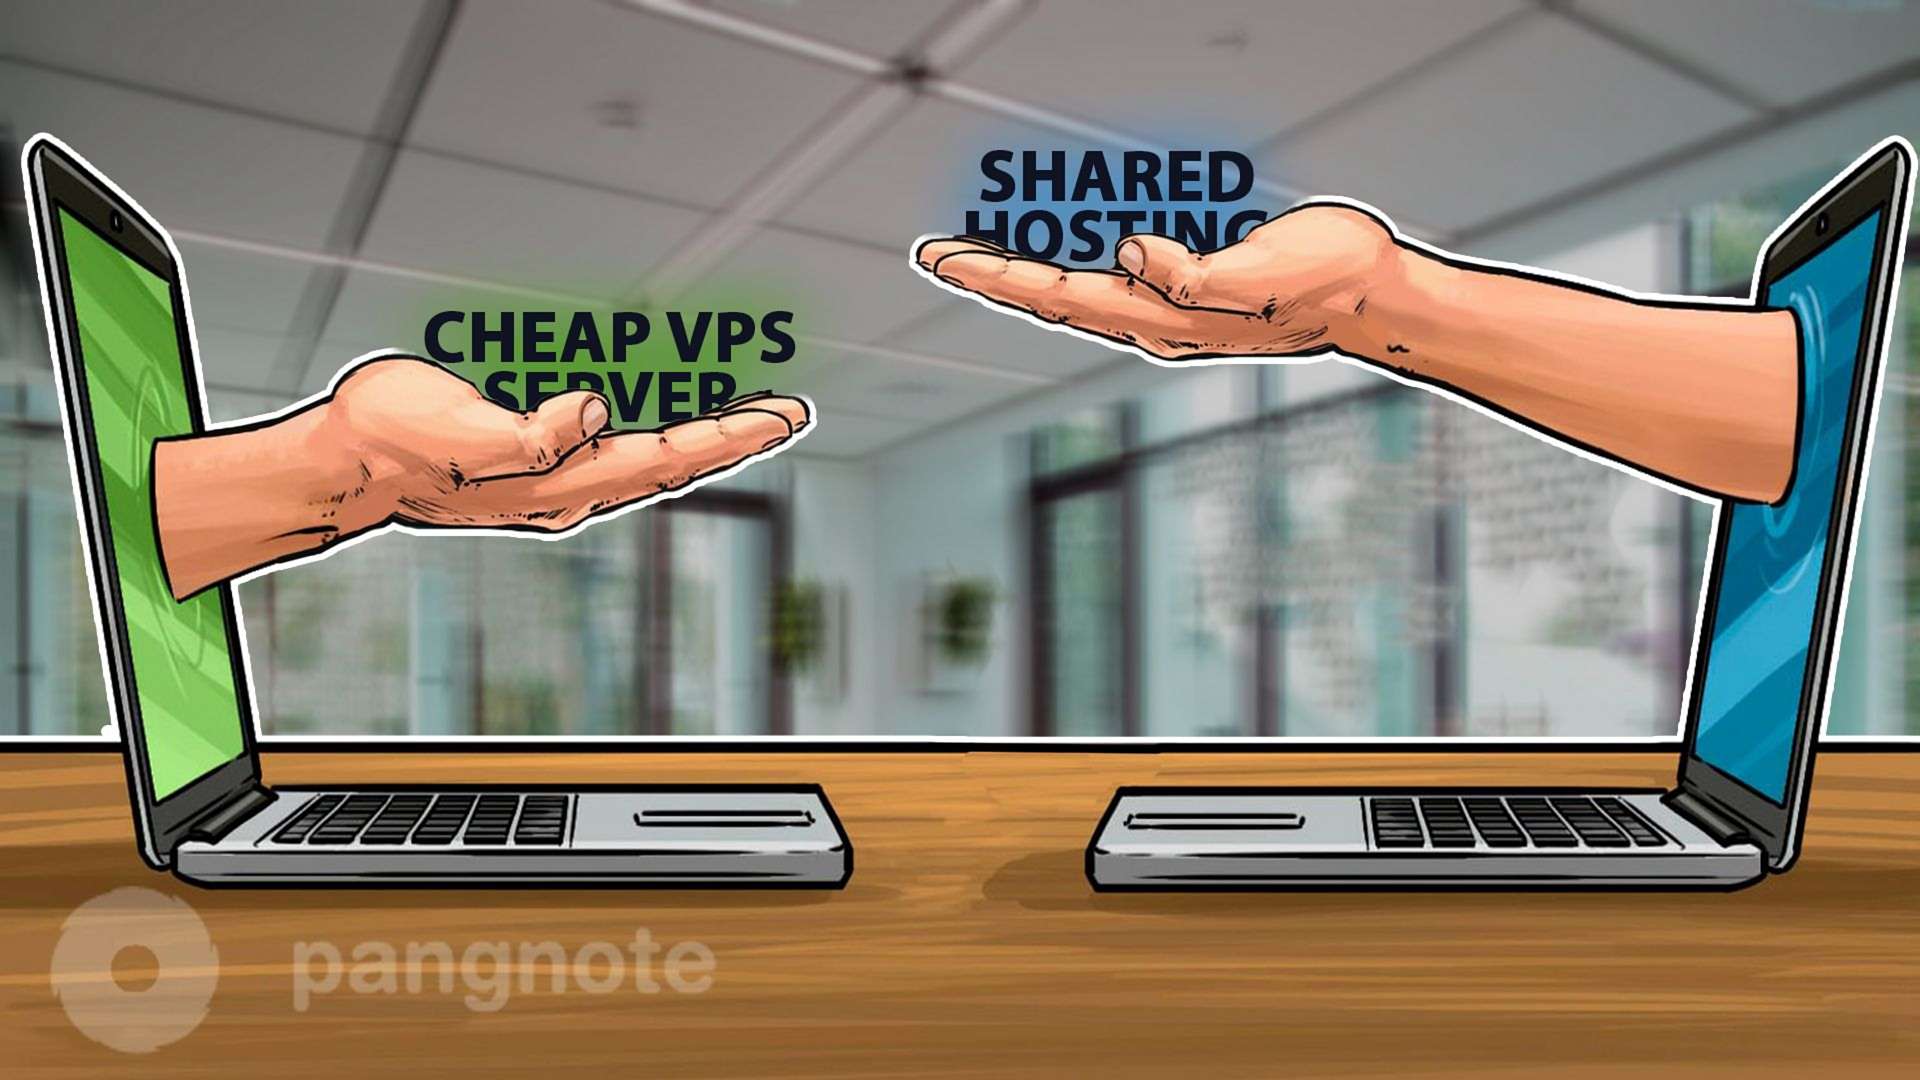 Differences between cheap VPS server and shared hosting